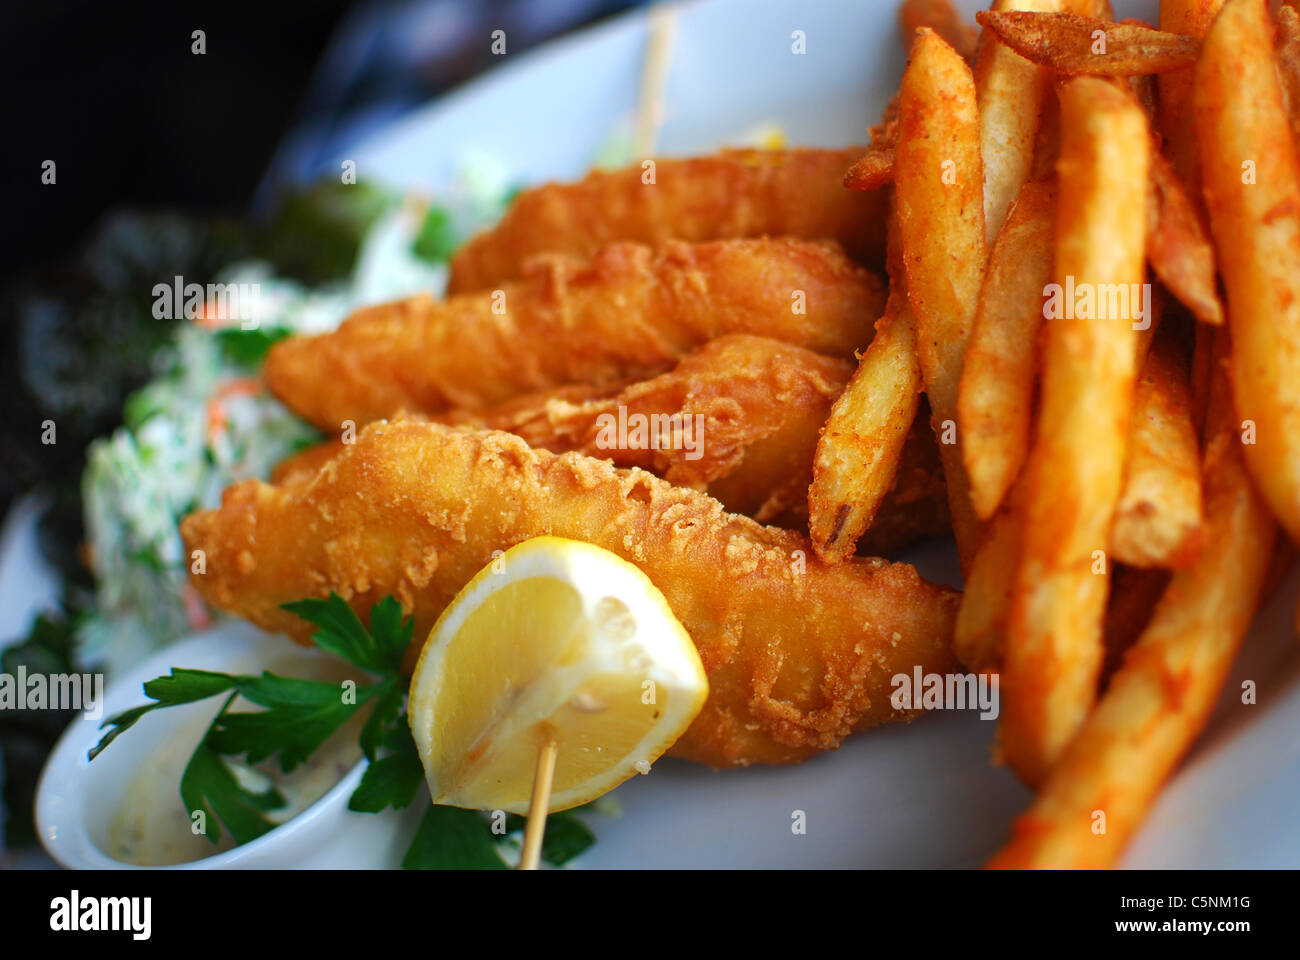 Fish and chips on a plate. Stock Photo